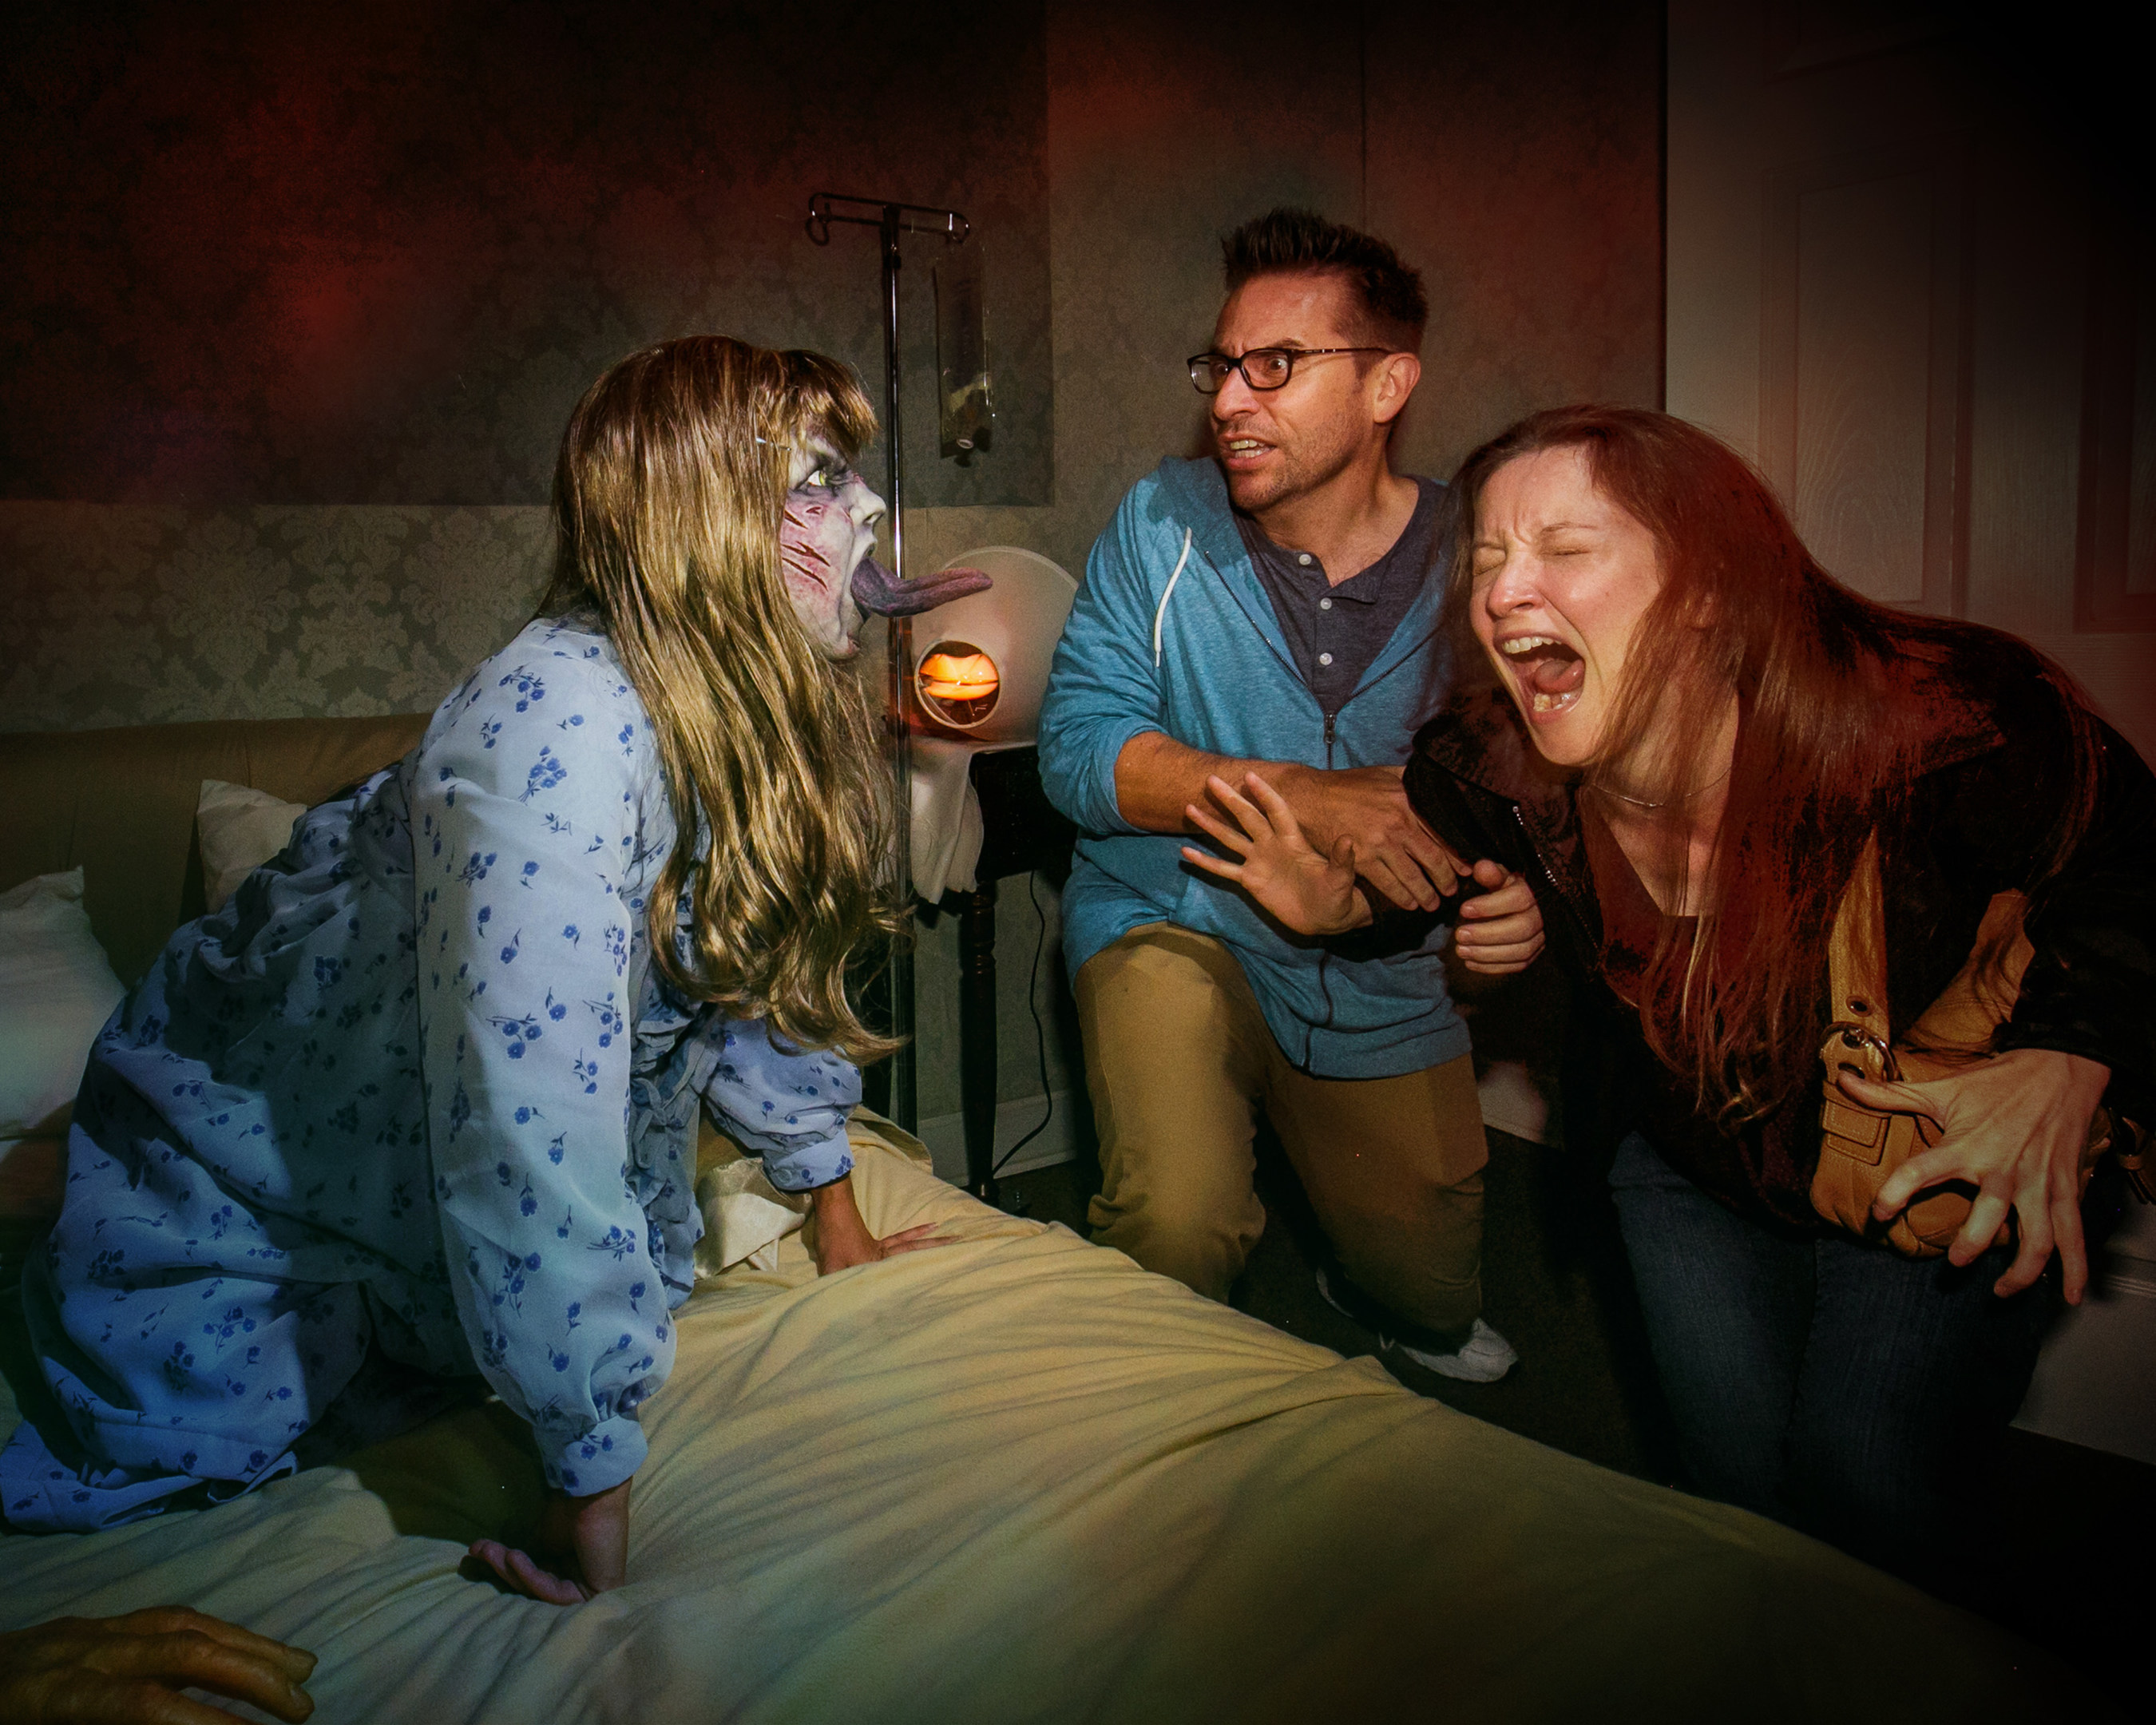 Southern California's Most Intense Halloween Event Kicks off at Universal Studios Hollywood as "Halloween Horror Nights" Comes to Life with an All-New Slate of Terrifying Mazes